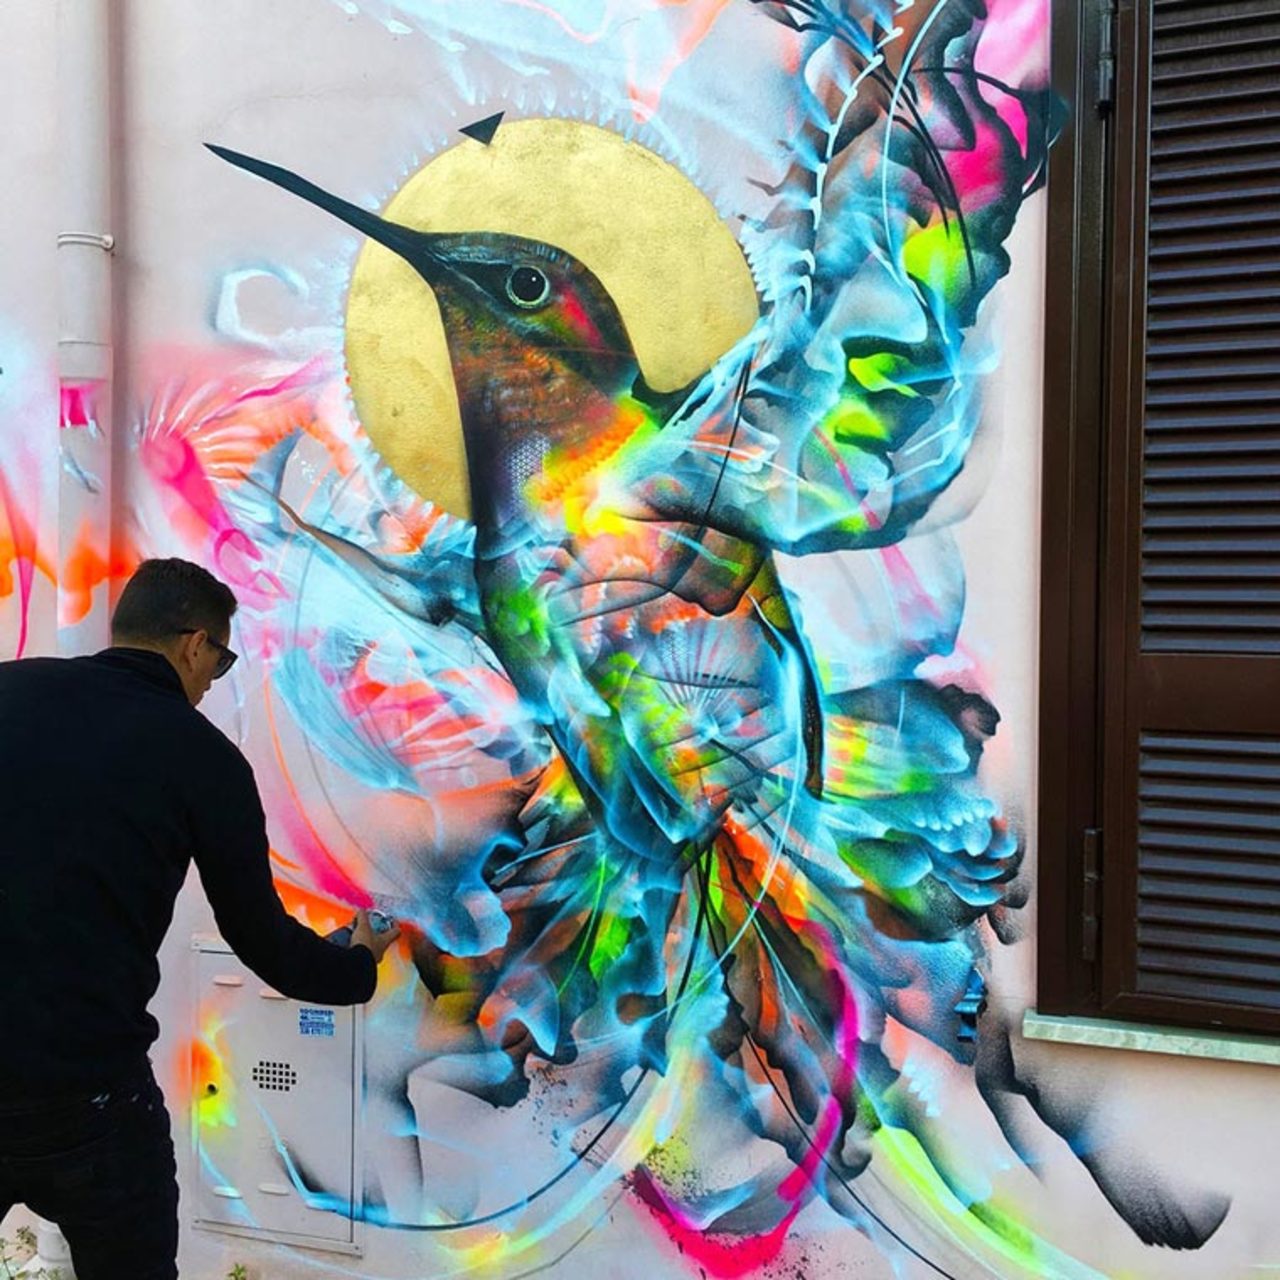 #ArtHub #Art #Арт Street Art Birds - The explosive and colorful creations by L7M (21 ... - http://arthubmagazine.com/street-art/street-art-birds-the-explosive-and-colorful-creations-by-l-m/ https://t.co/MQGK33xWtL